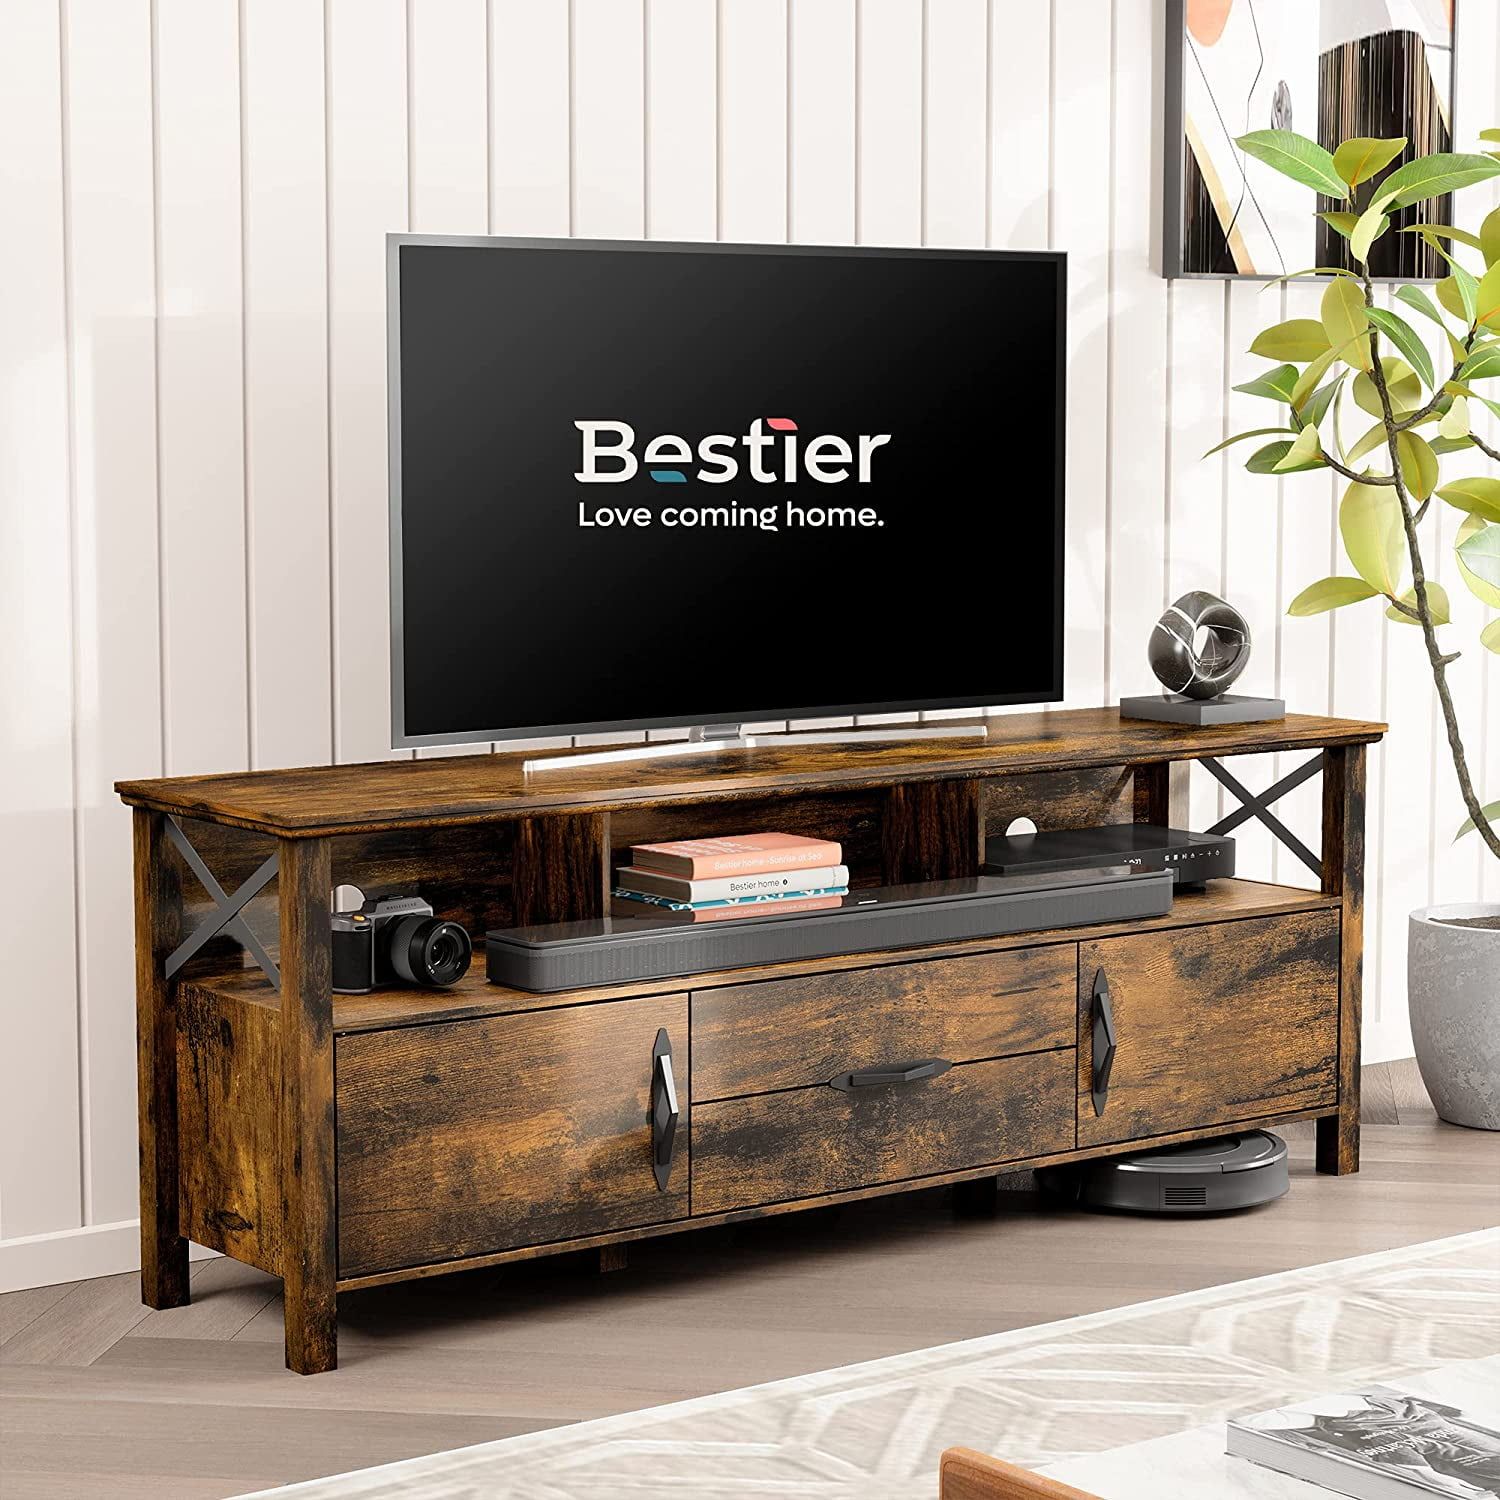 Bestier Tv Stand For Tv Up To 70 Inch, Tv Cabinet With Wooden Drawer Within Cafe Tv Stands With Storage (Gallery 13 of 20)